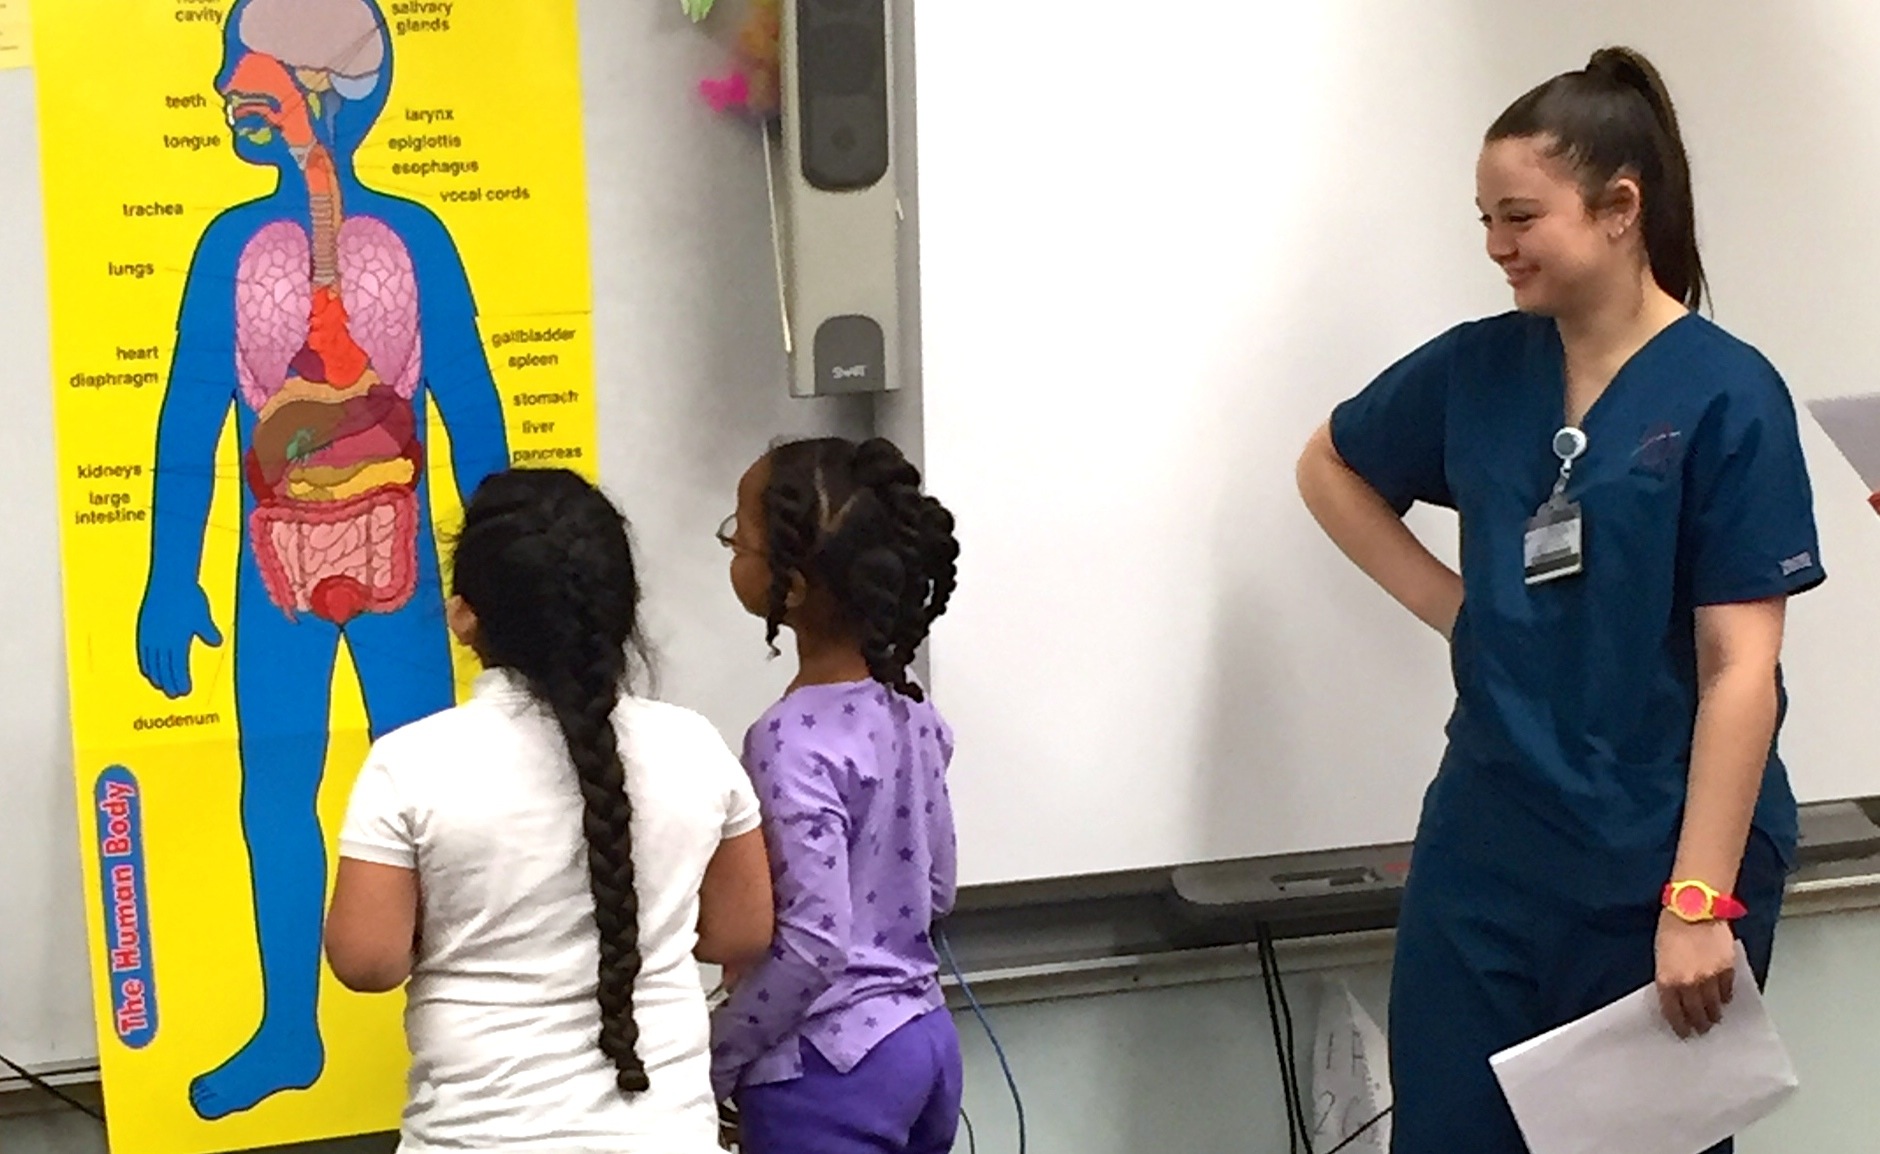 UALR nursing student Jessica Bell teaches Little Rock elementary students about nutrition as part of the Love Your Schools project.